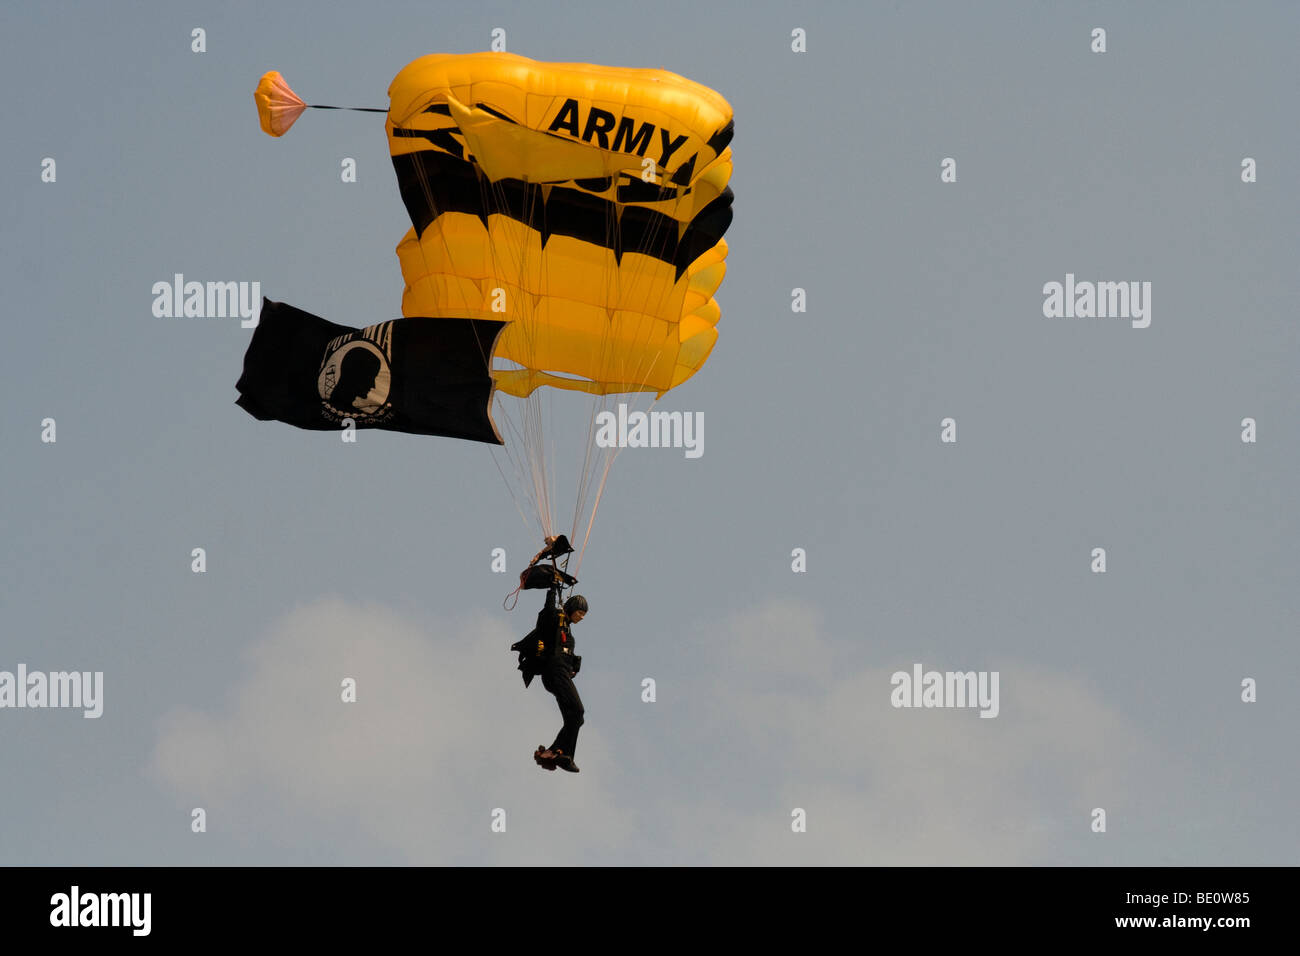 US Army Parachute Team. Chicago Air & Water Show 2009 Foto Stock